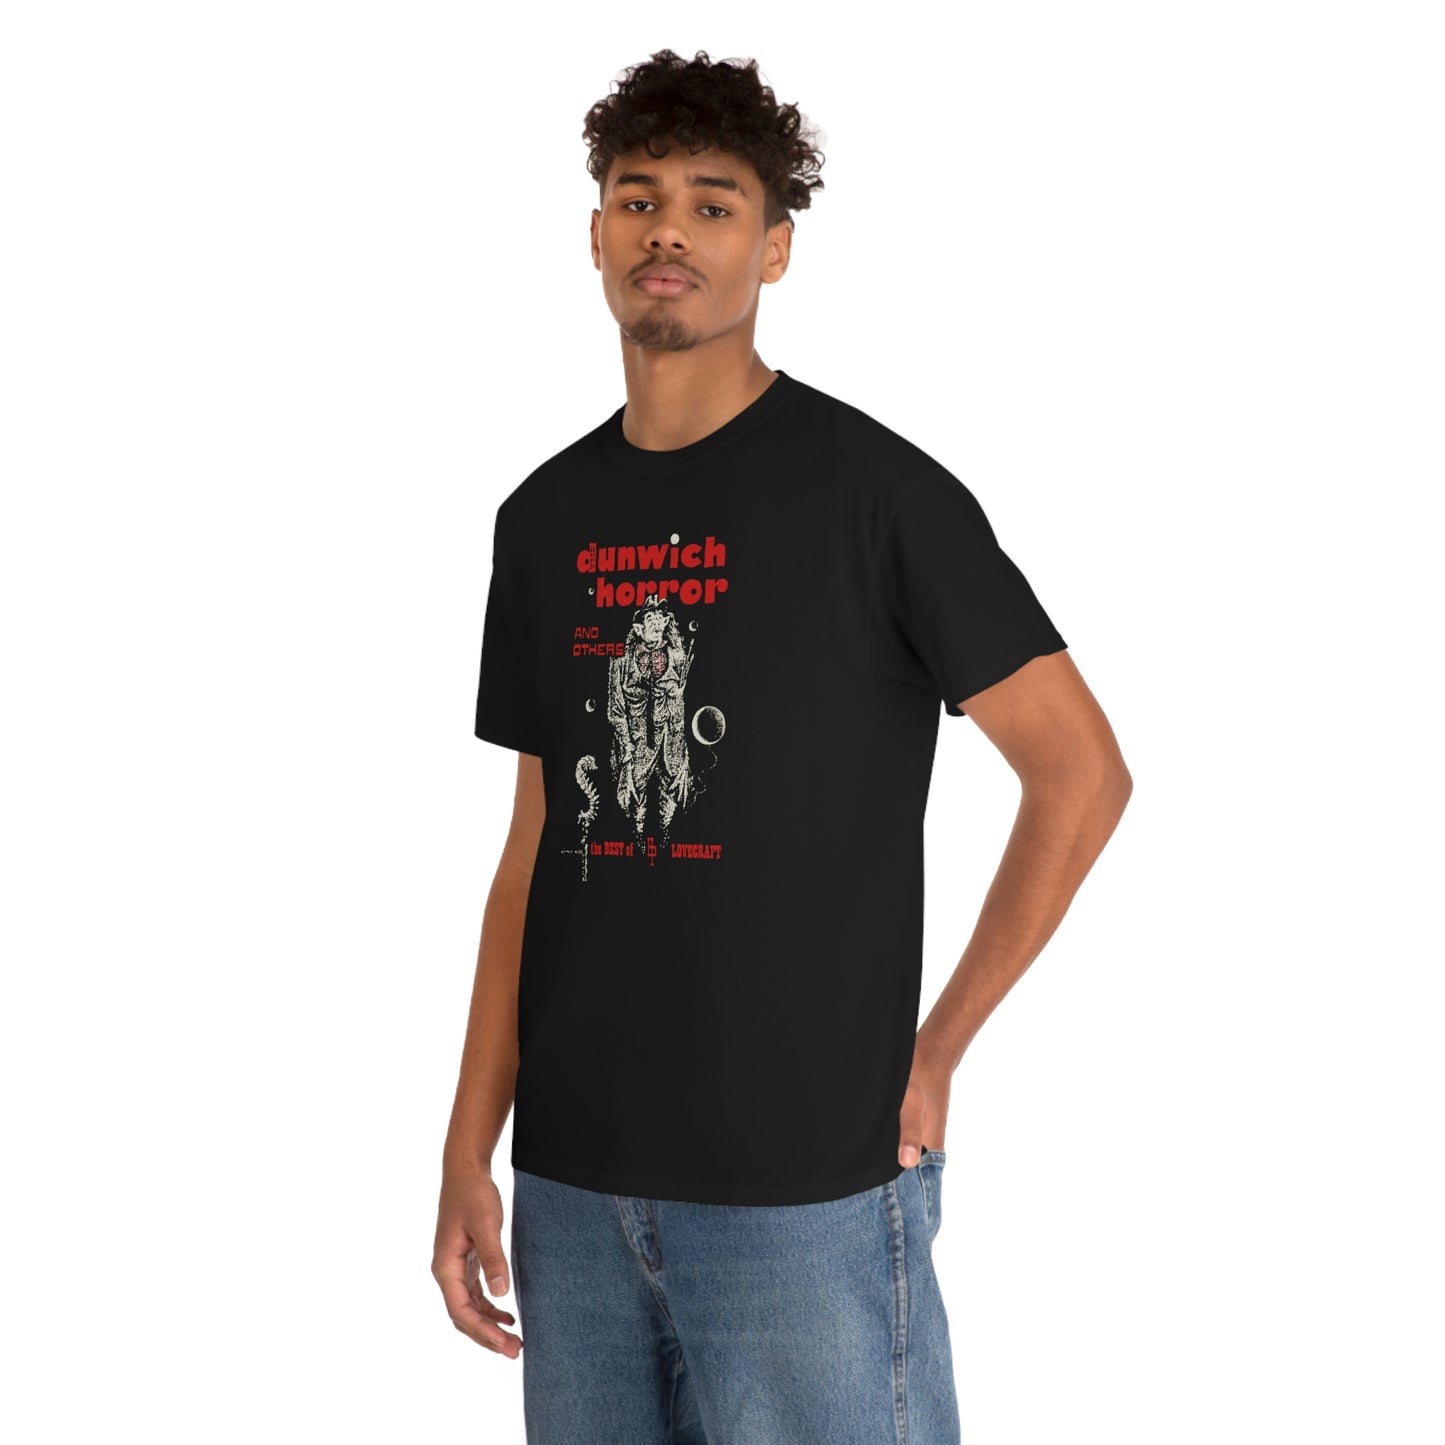 The Dunwich Horror and Others T-Shirt